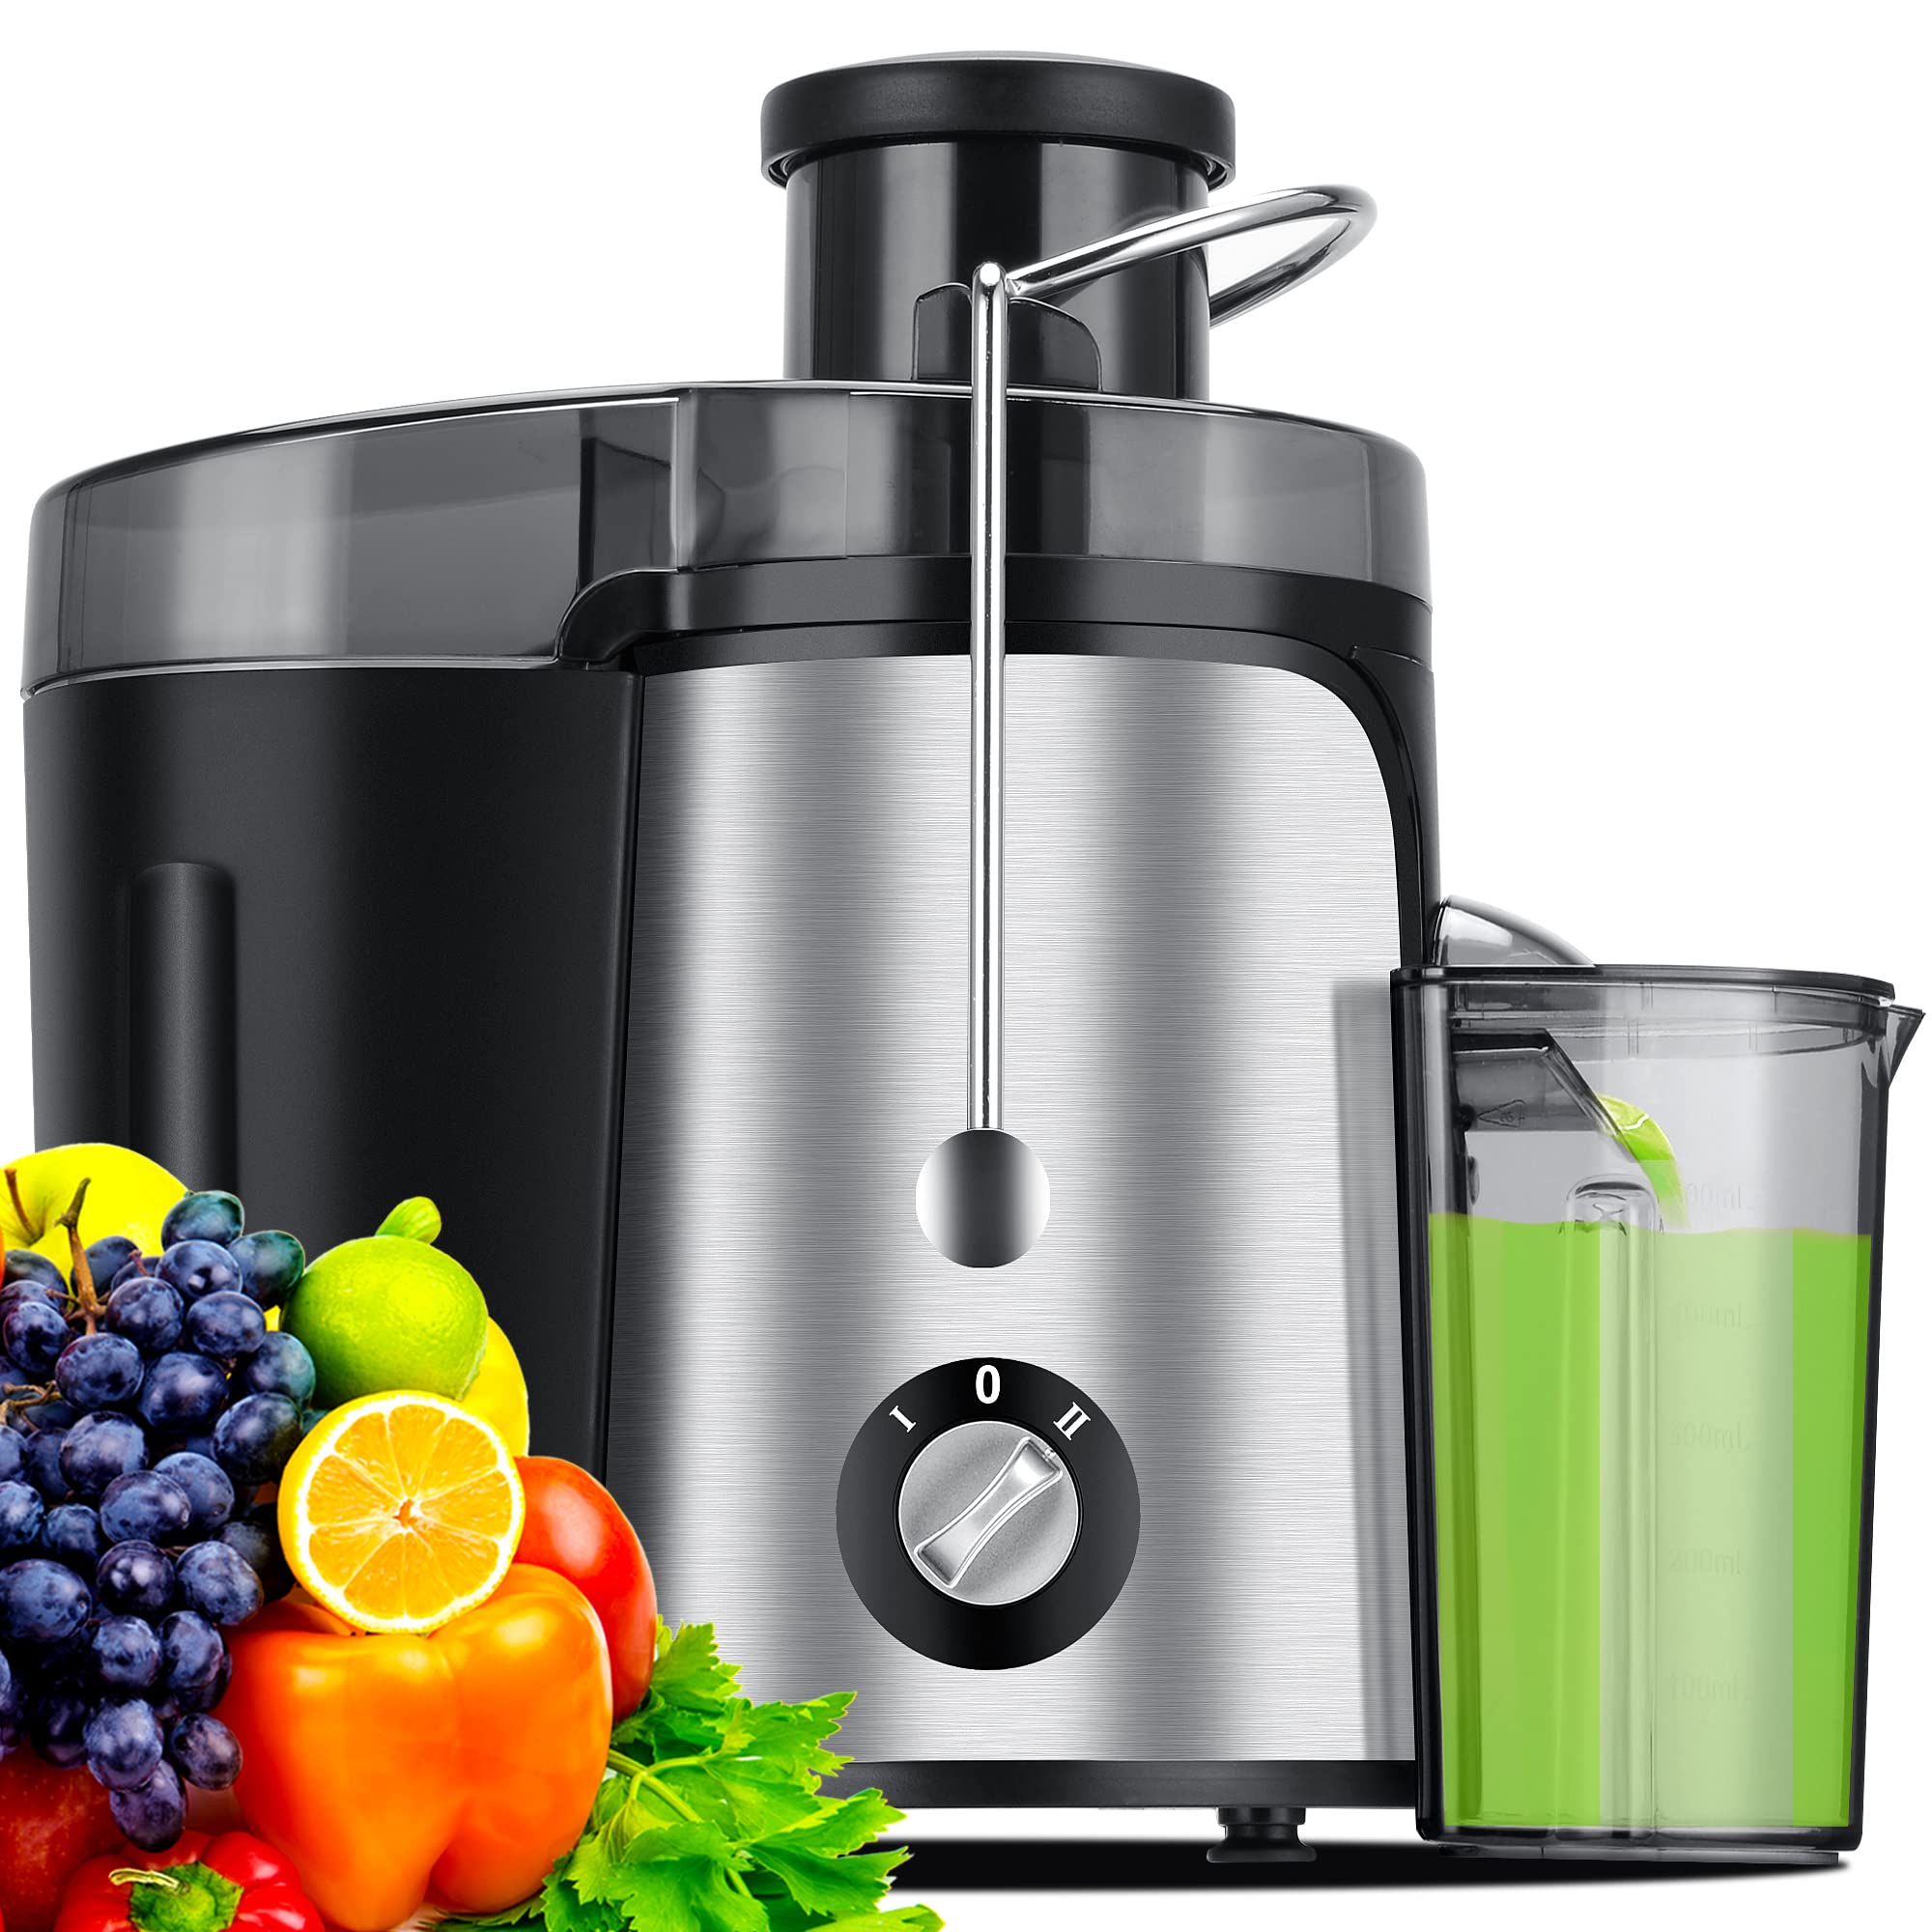 ZNOAV Juicer Machine, 600W Juicer with 35A Big Mouth for Whole Fruits and Veg, Juice Extractor with 3 Speeds, BPA Free, Easy to clean